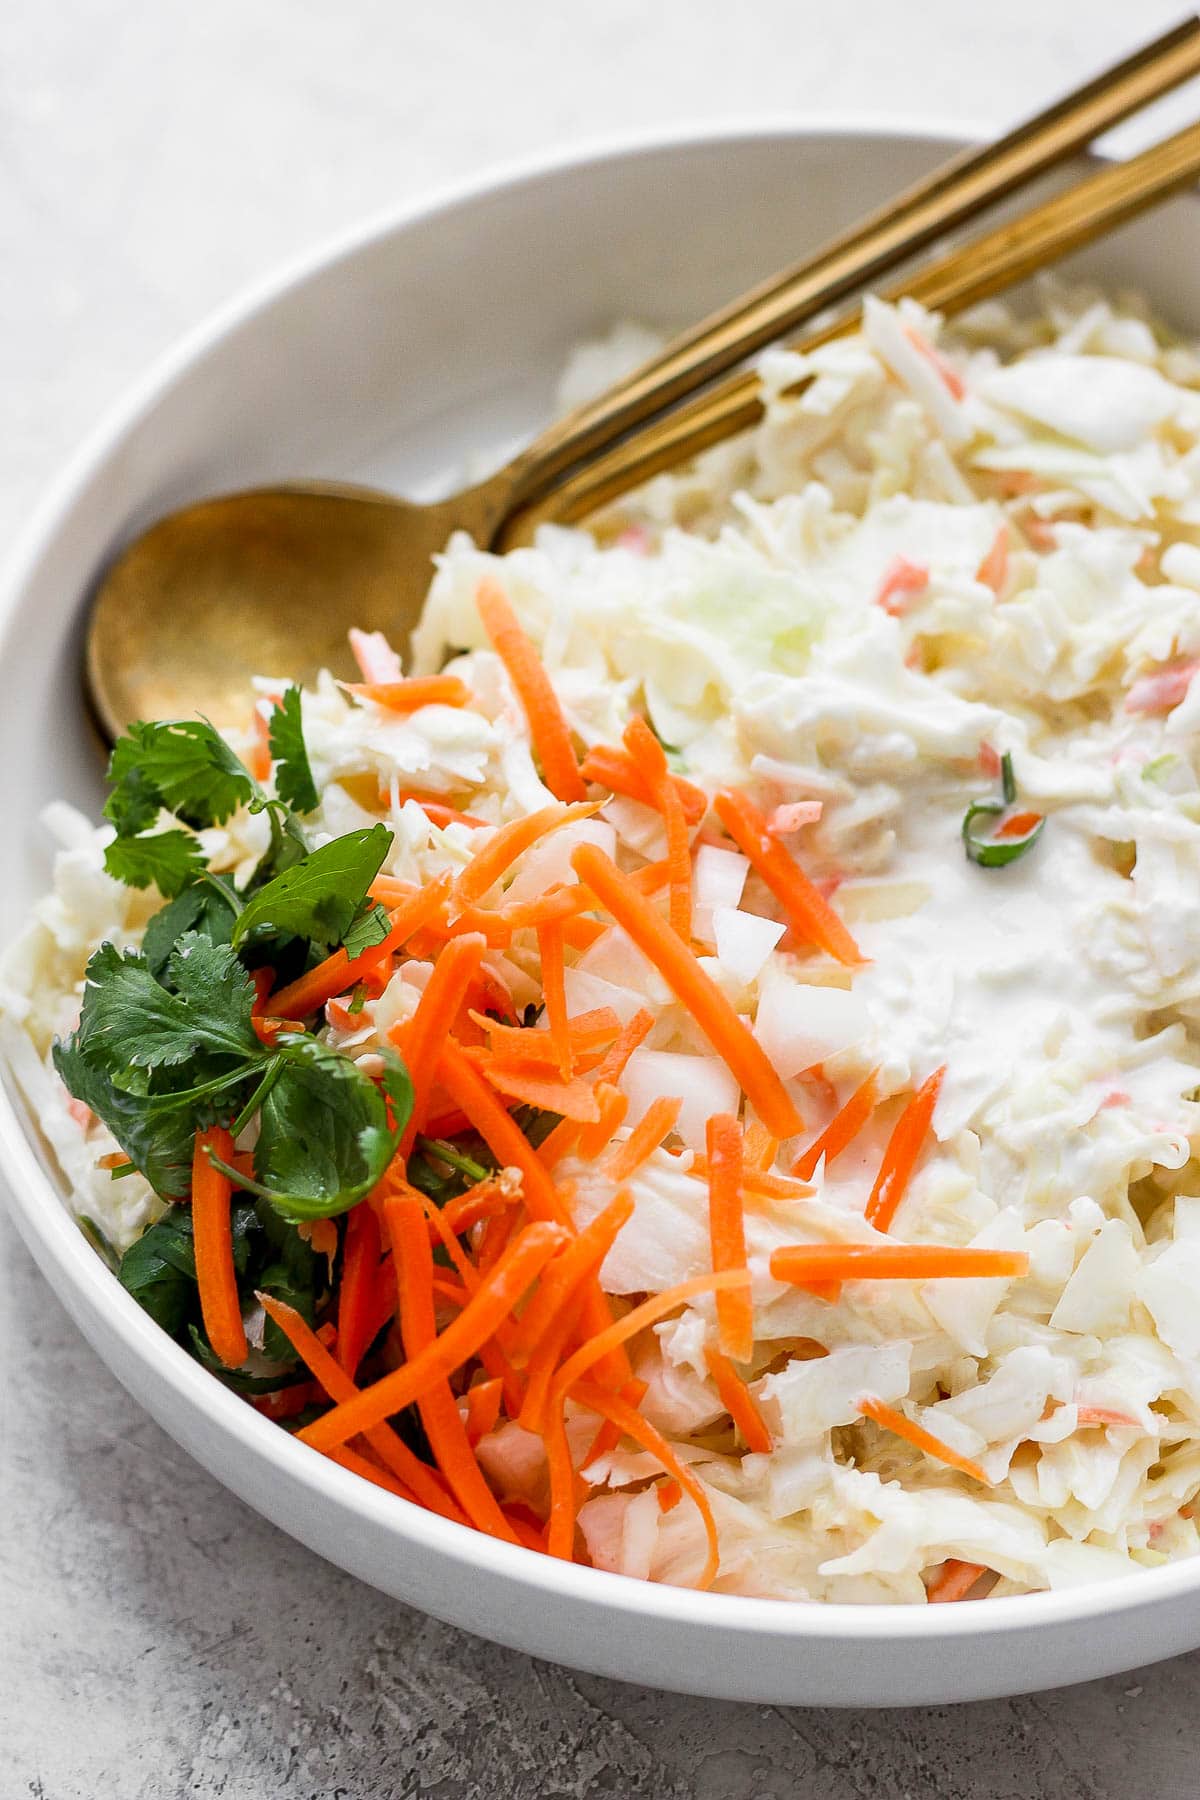 A bowl of creamy coleslaw and 2 spoons.